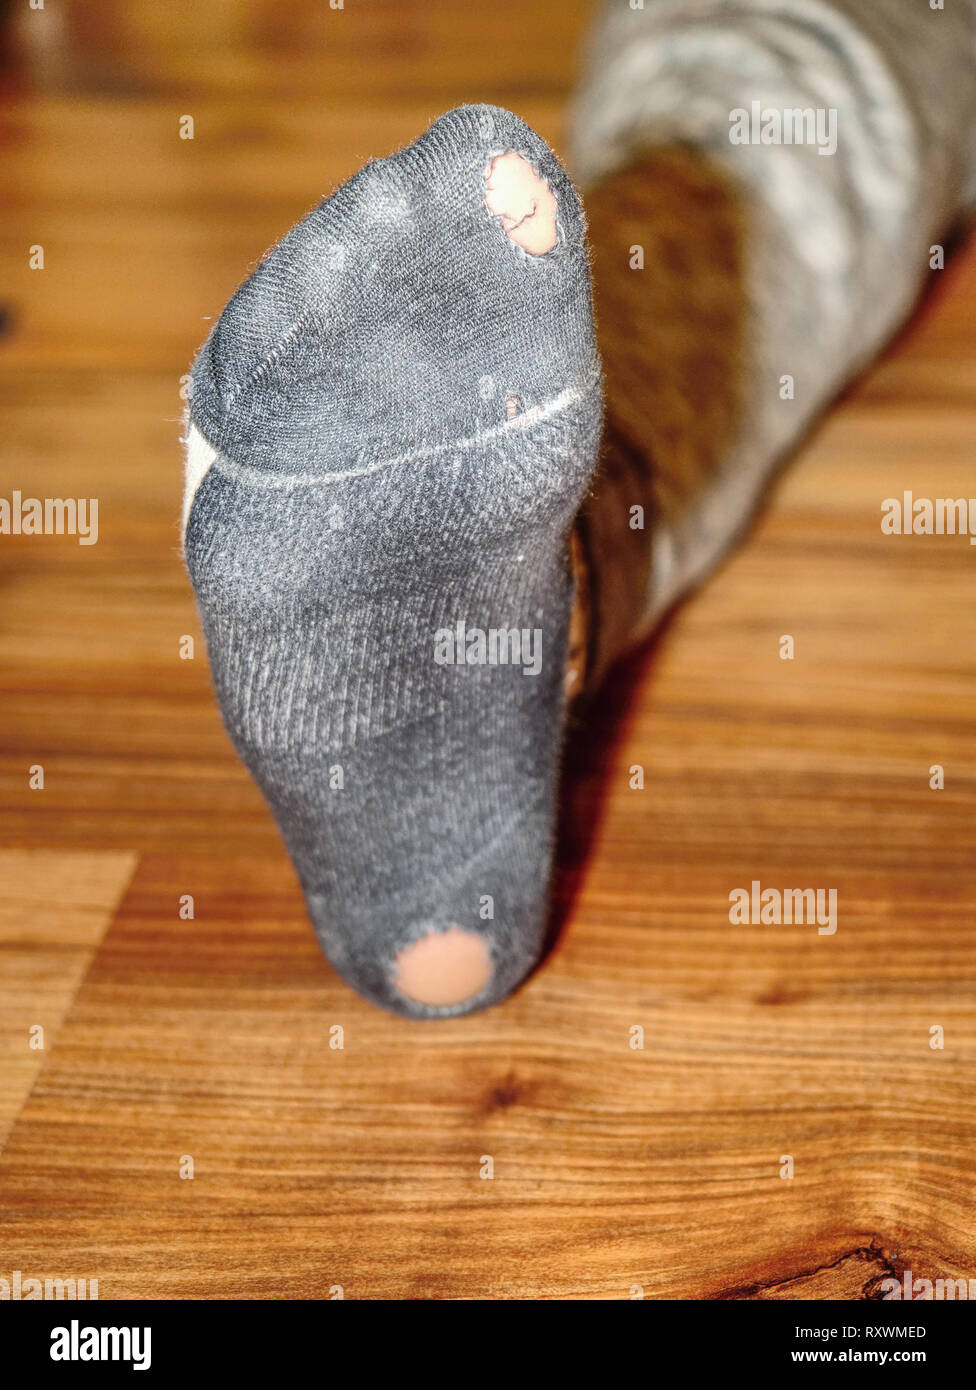 Worn out socks with holes and toes sticking out of them on old